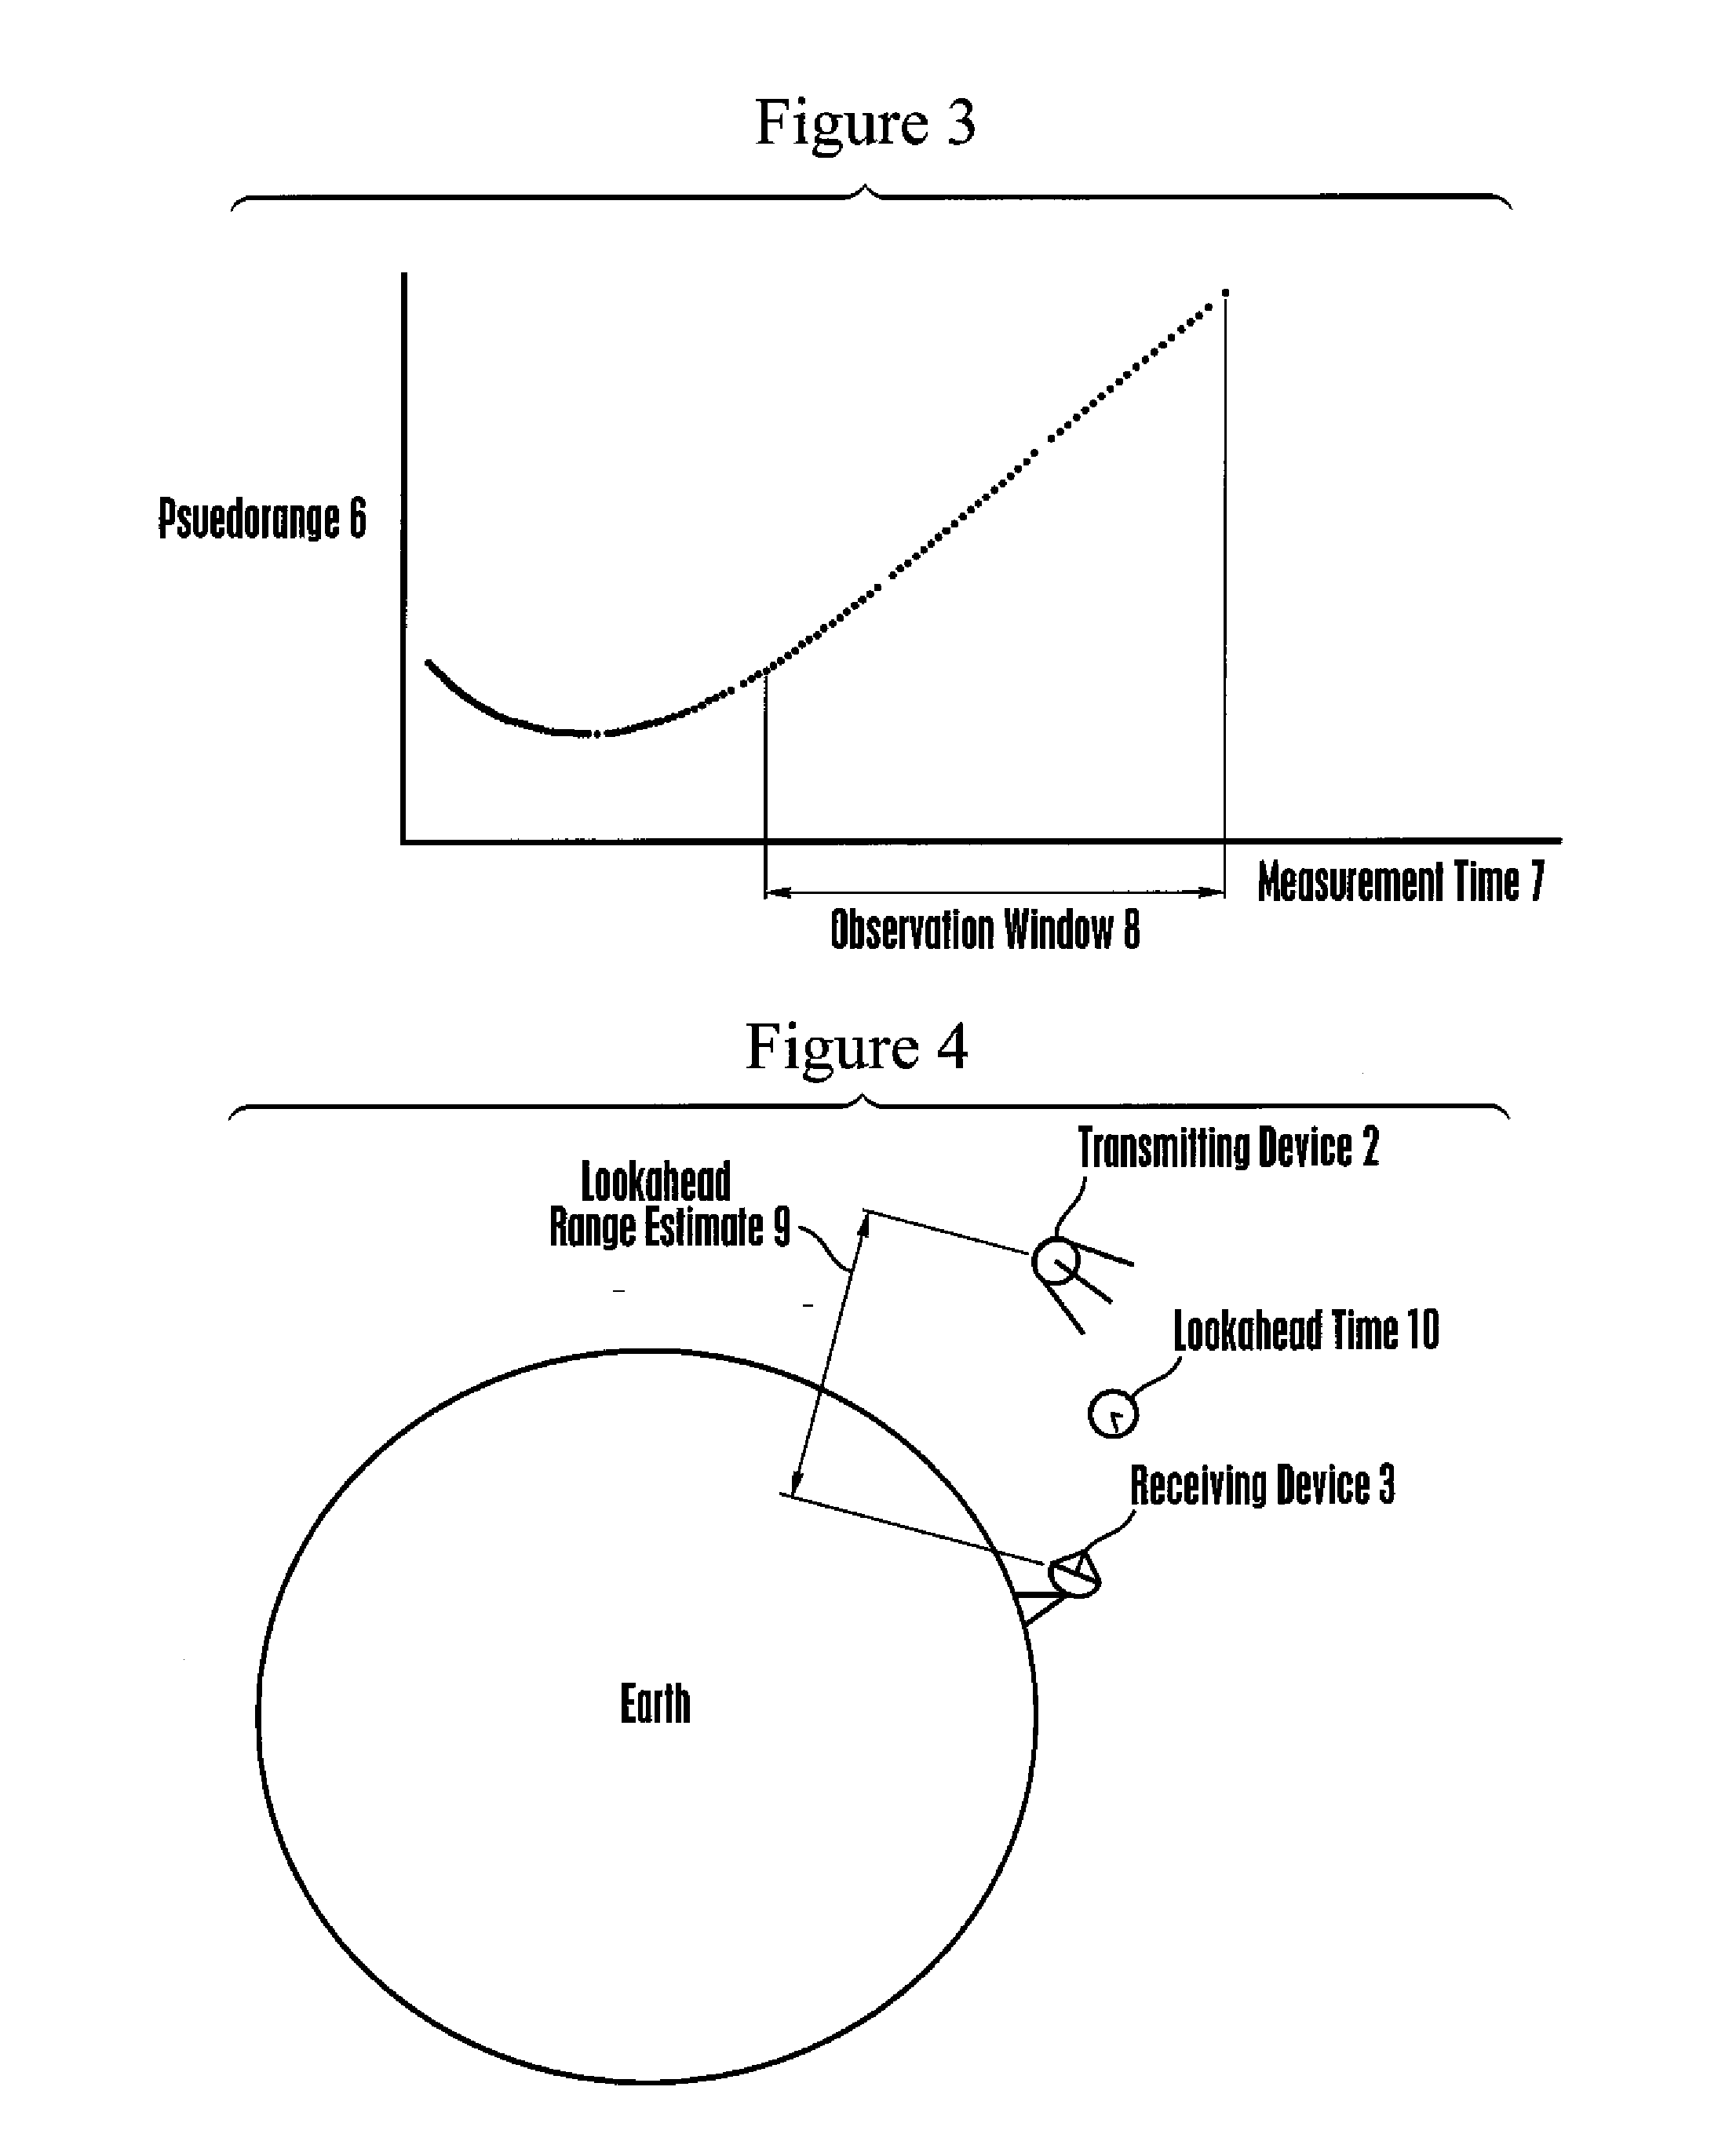 Method and apparatus for modeling of GNSS pseudorange measurements for interpolation, extrapolation, reduction of measurement errors, and data compression